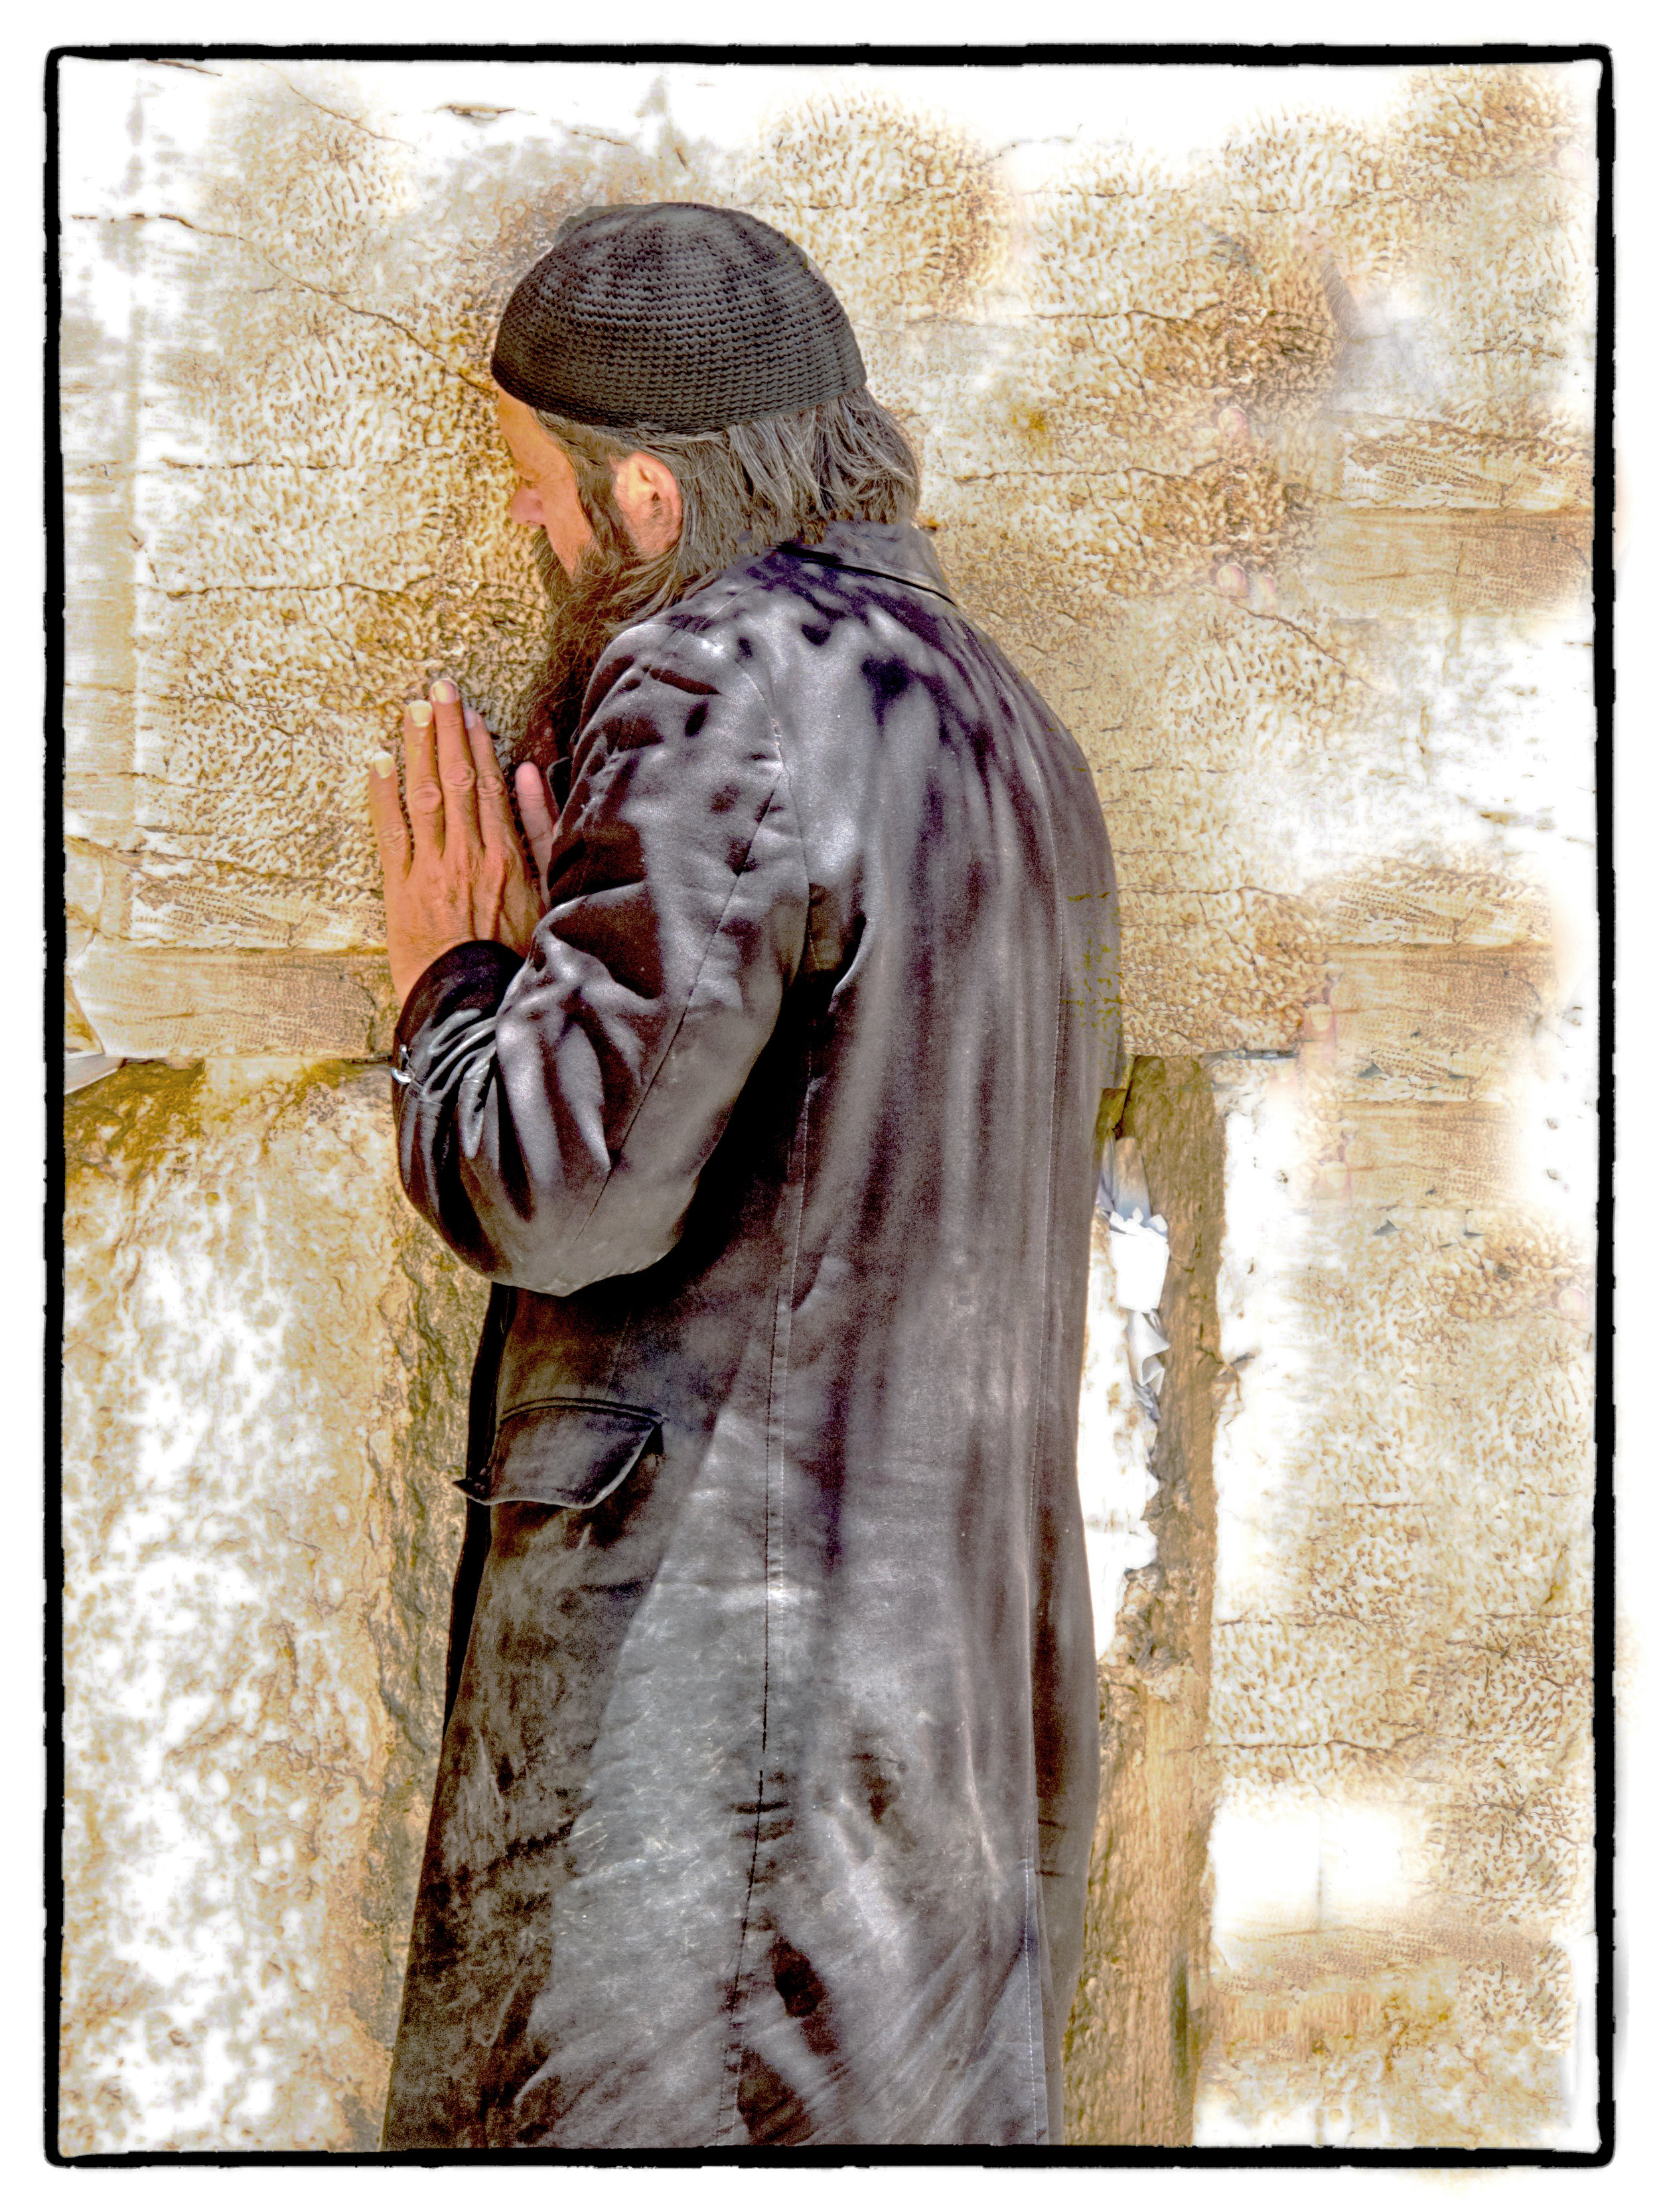 A Prayer at the Western Wall